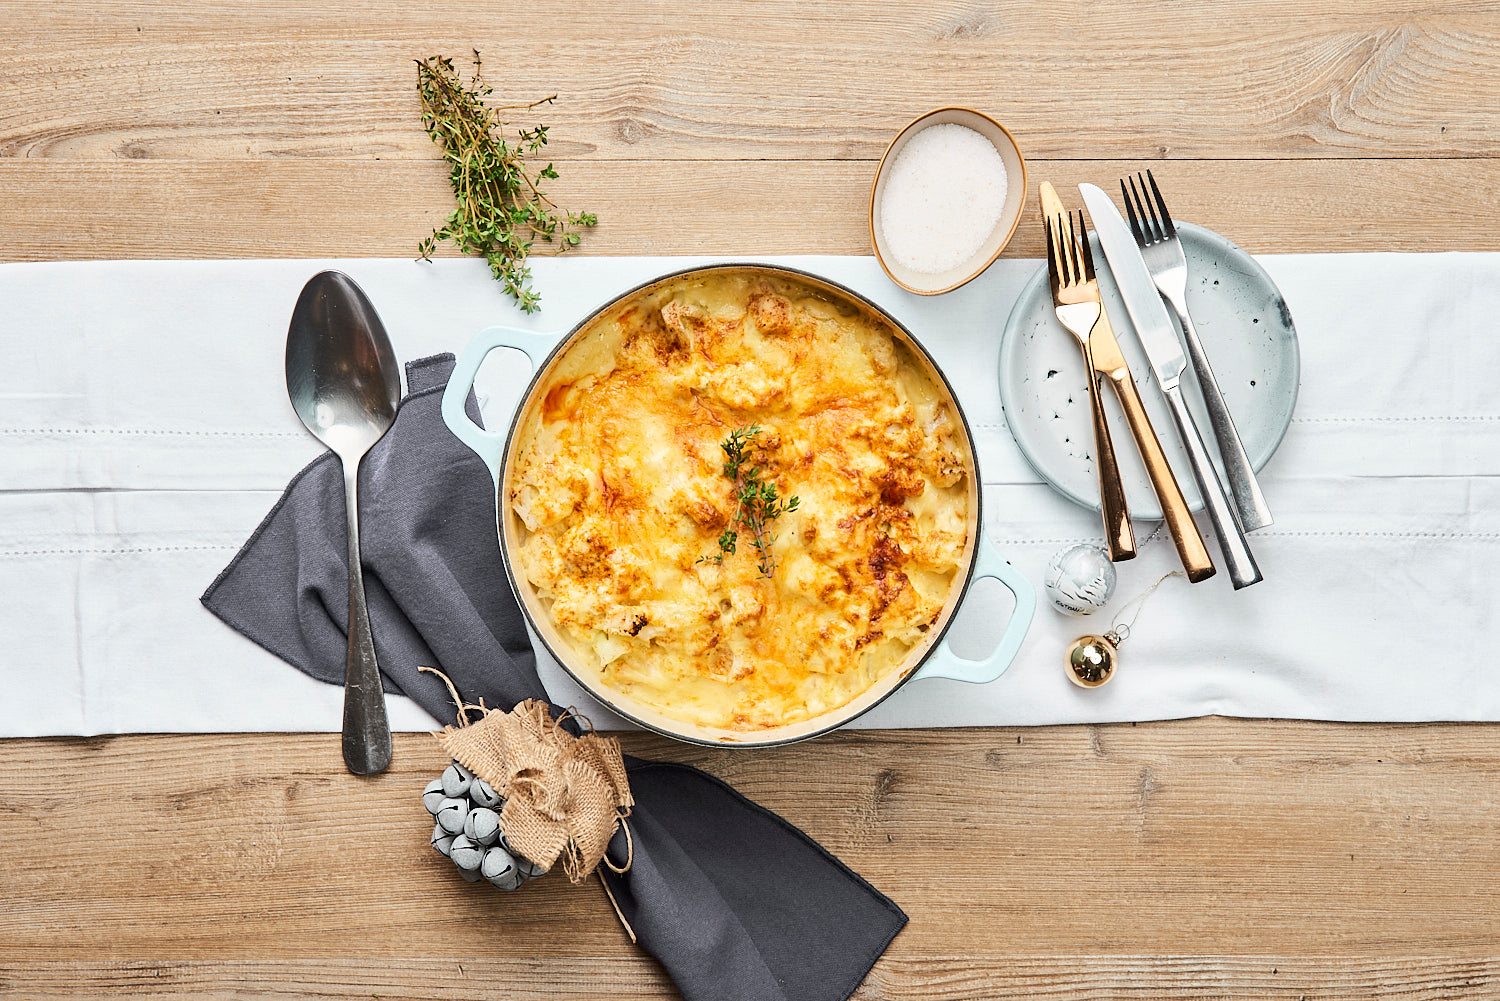 Smoked cheddar and thyme cauliflower gratin. Serves 2 - 3